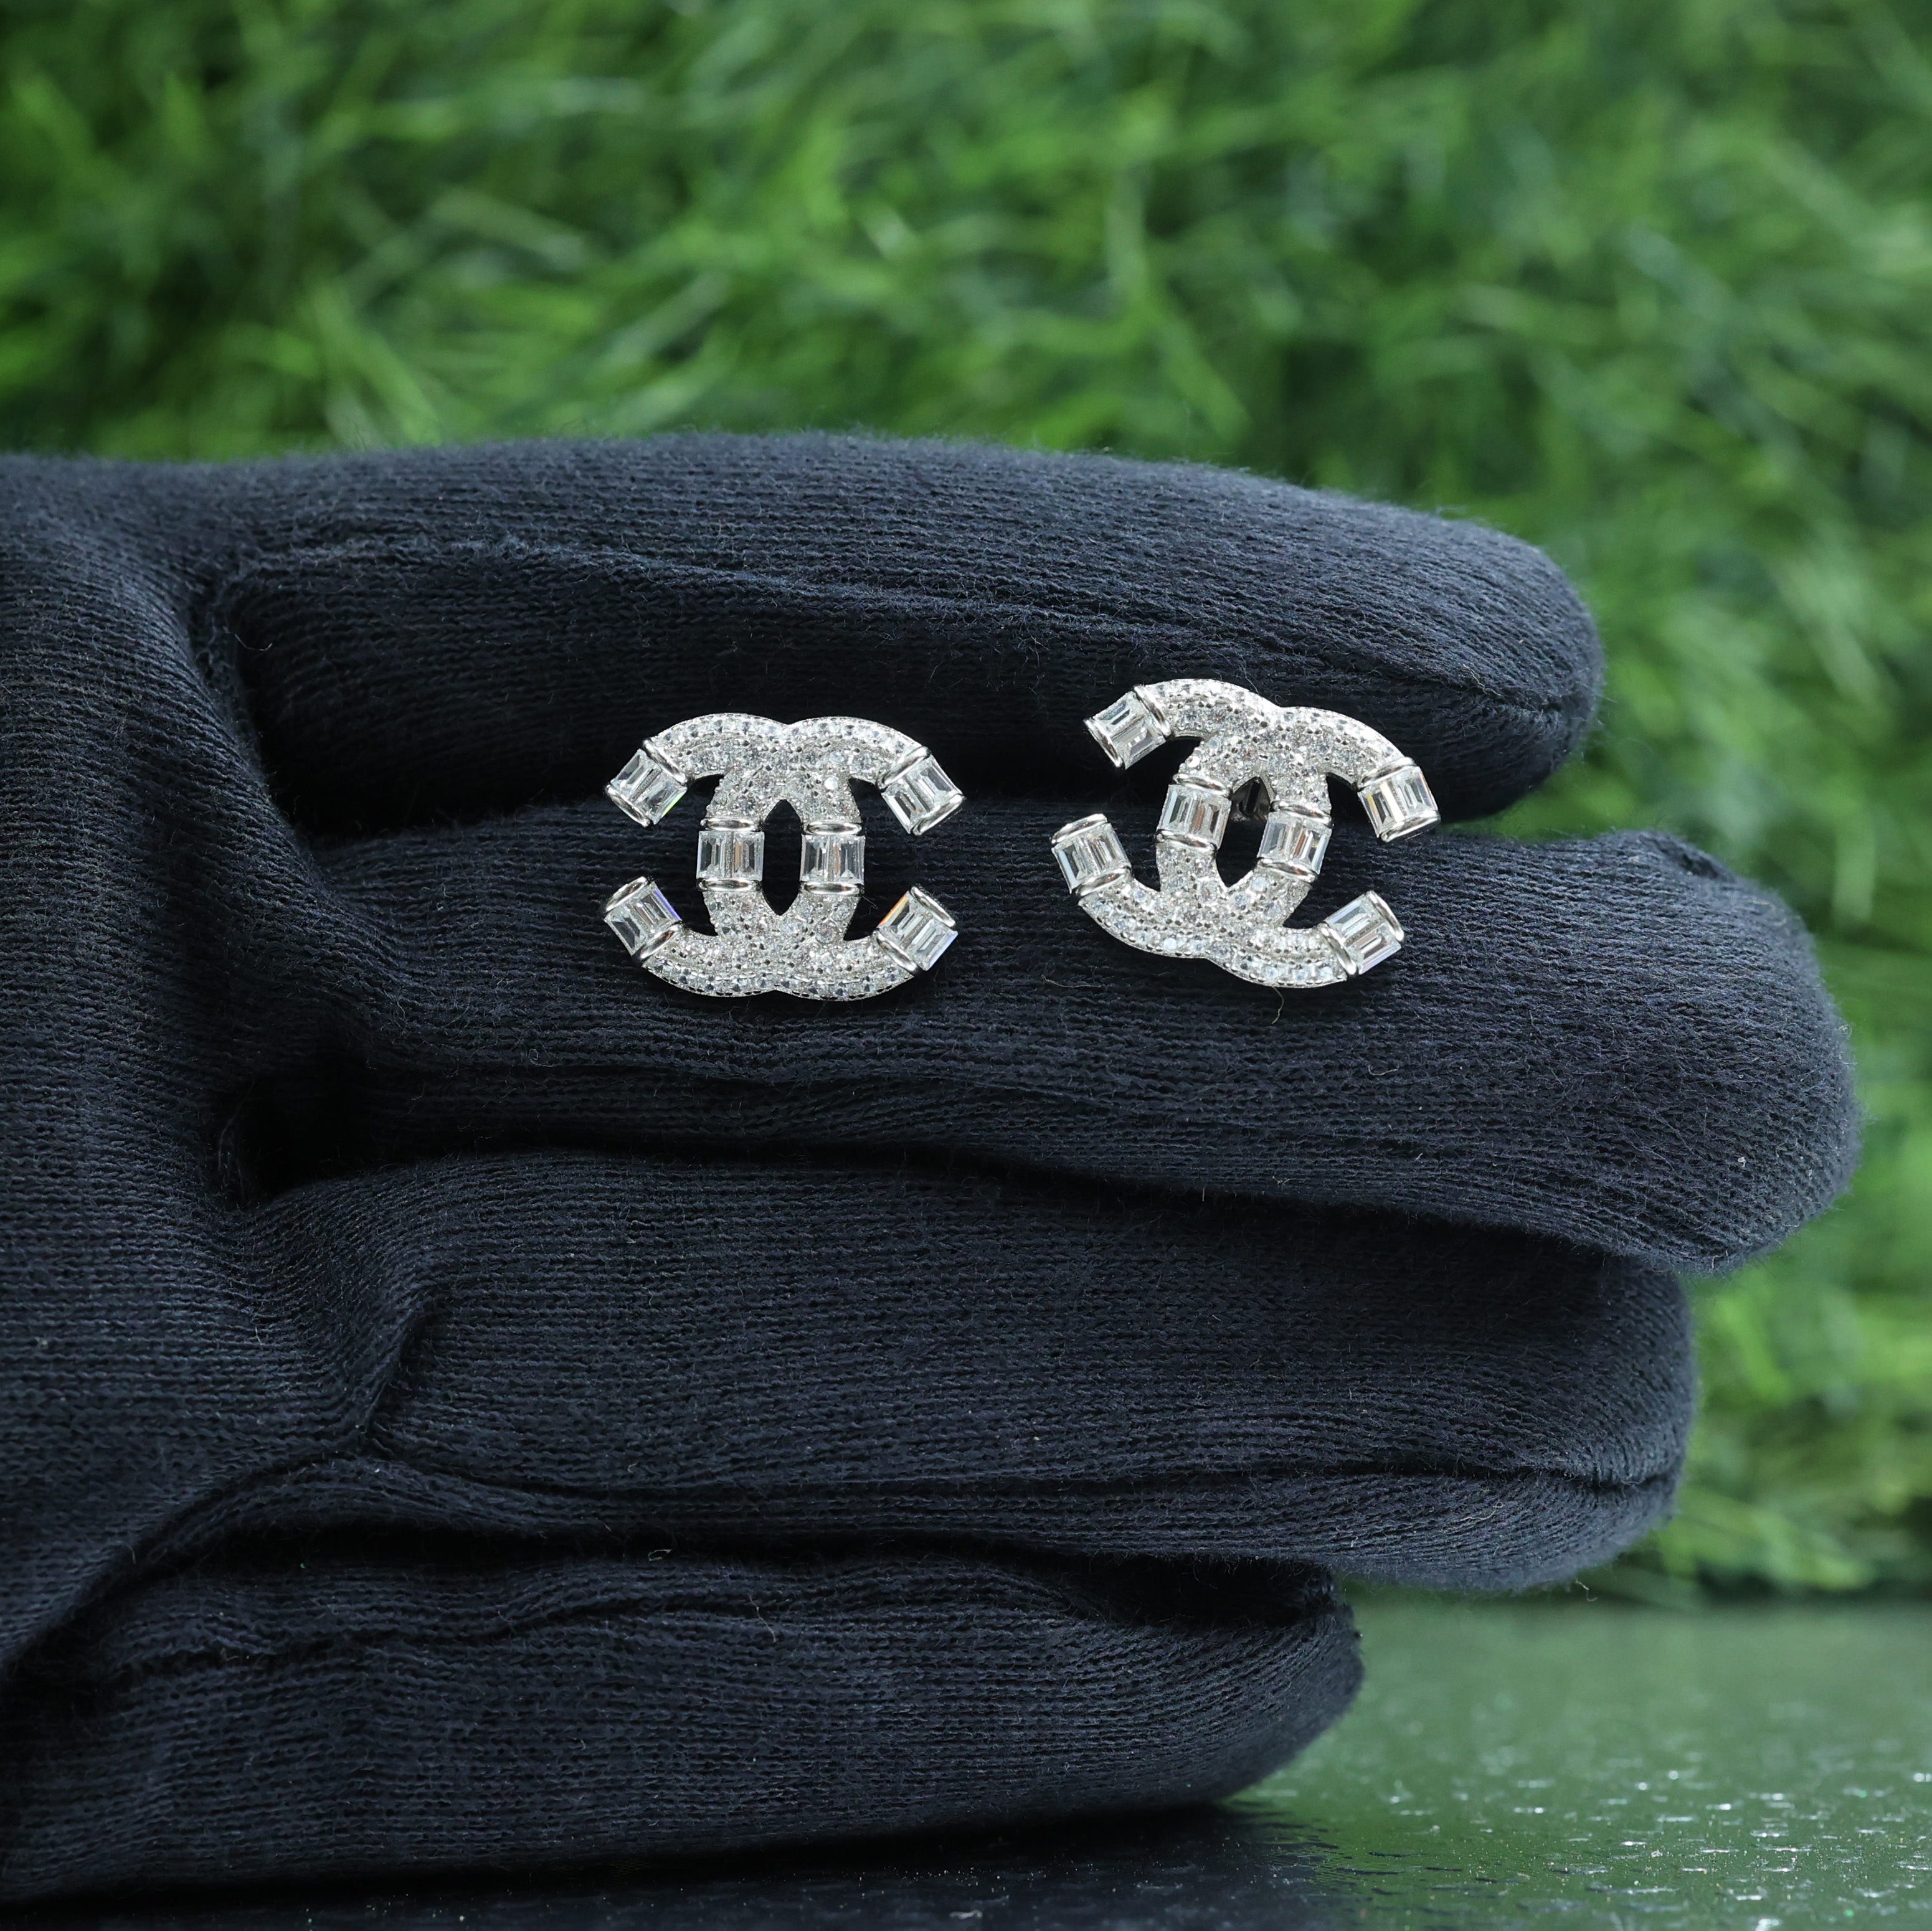 CC earring reminiscent of the renowned Chanel earring brand